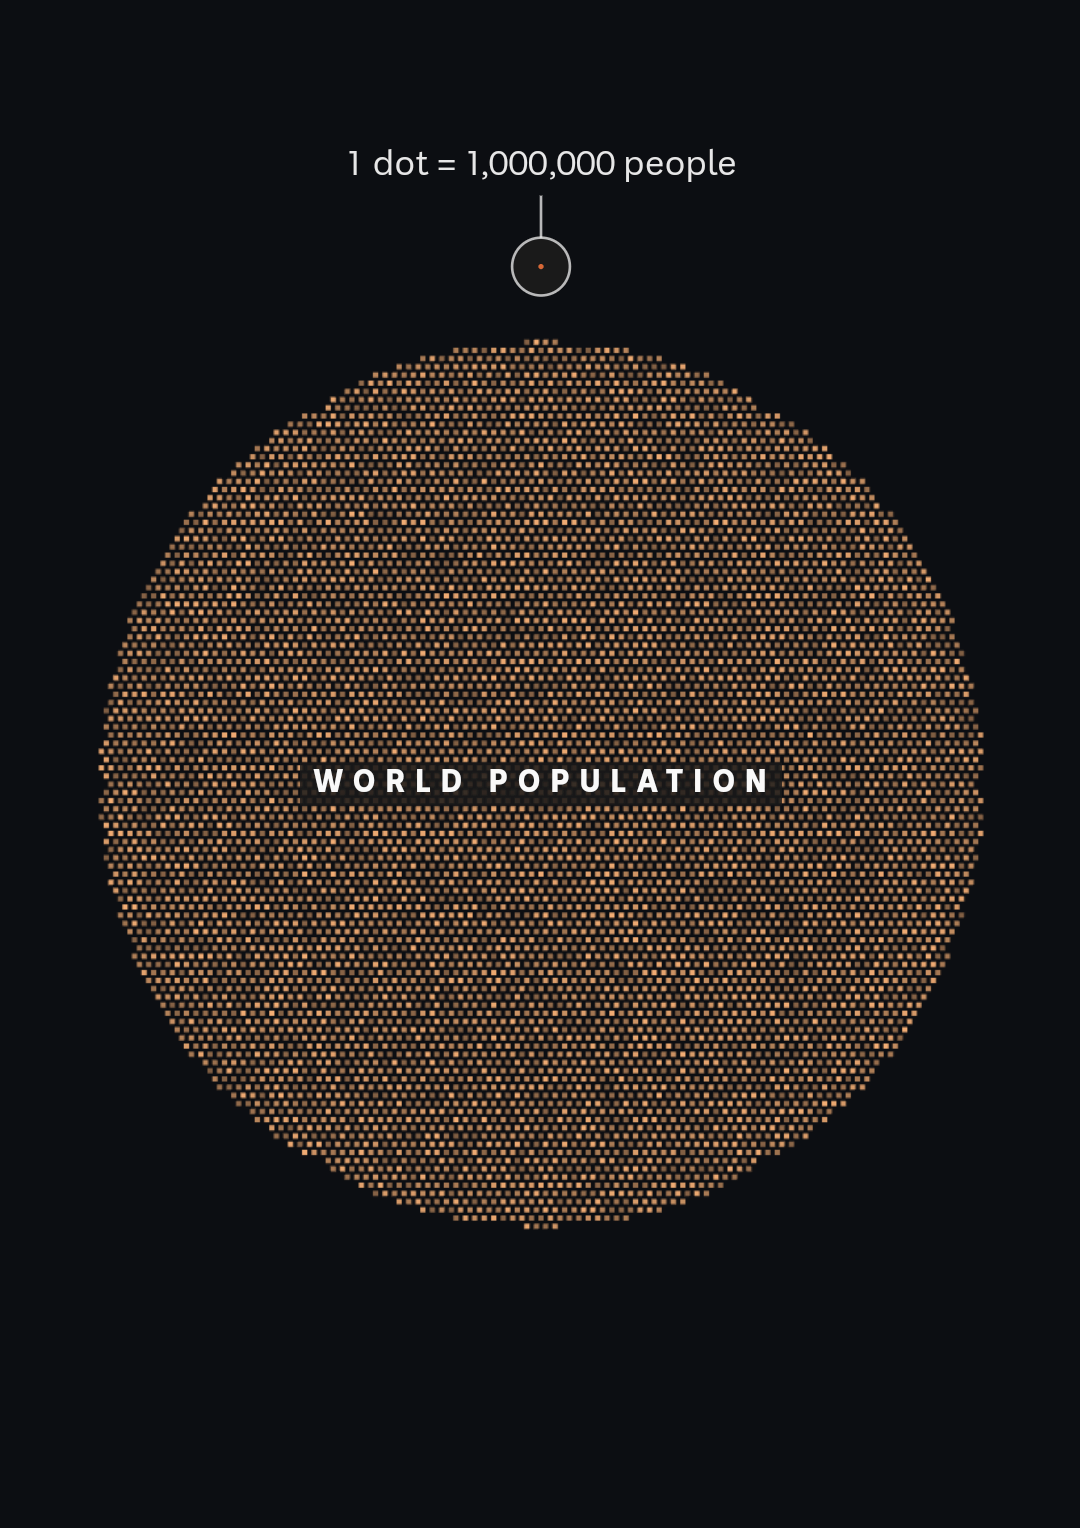 A mass of tiny orange dots arranged in a circle, labelled WORLD POULATION. A key shows 1 dot = million people